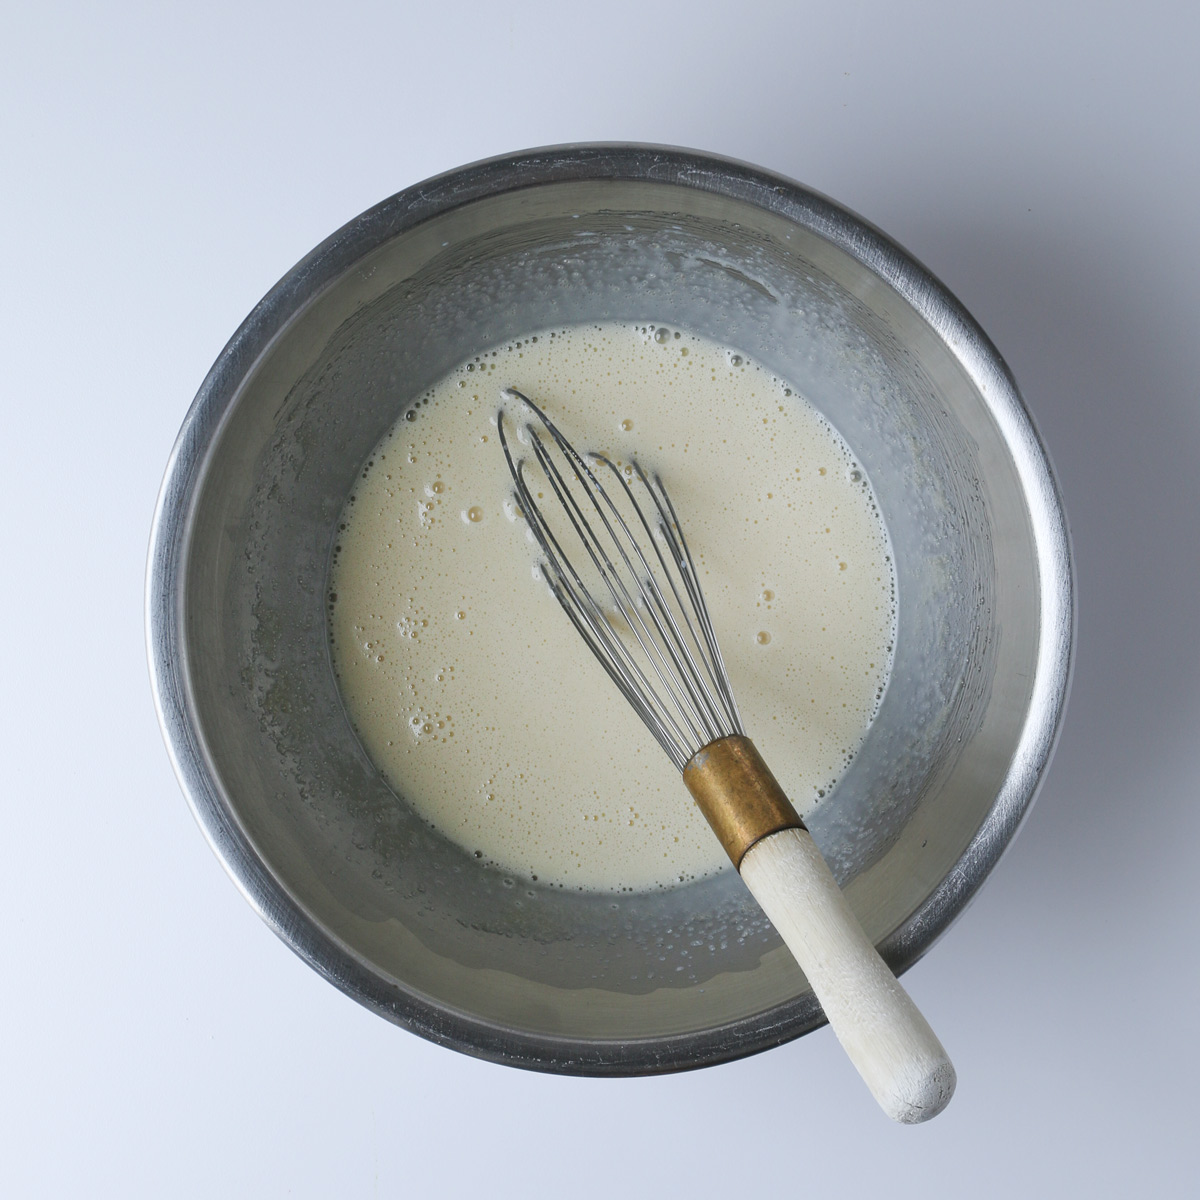 the wet ingredients combined in a mixing bowl, with the whisk.